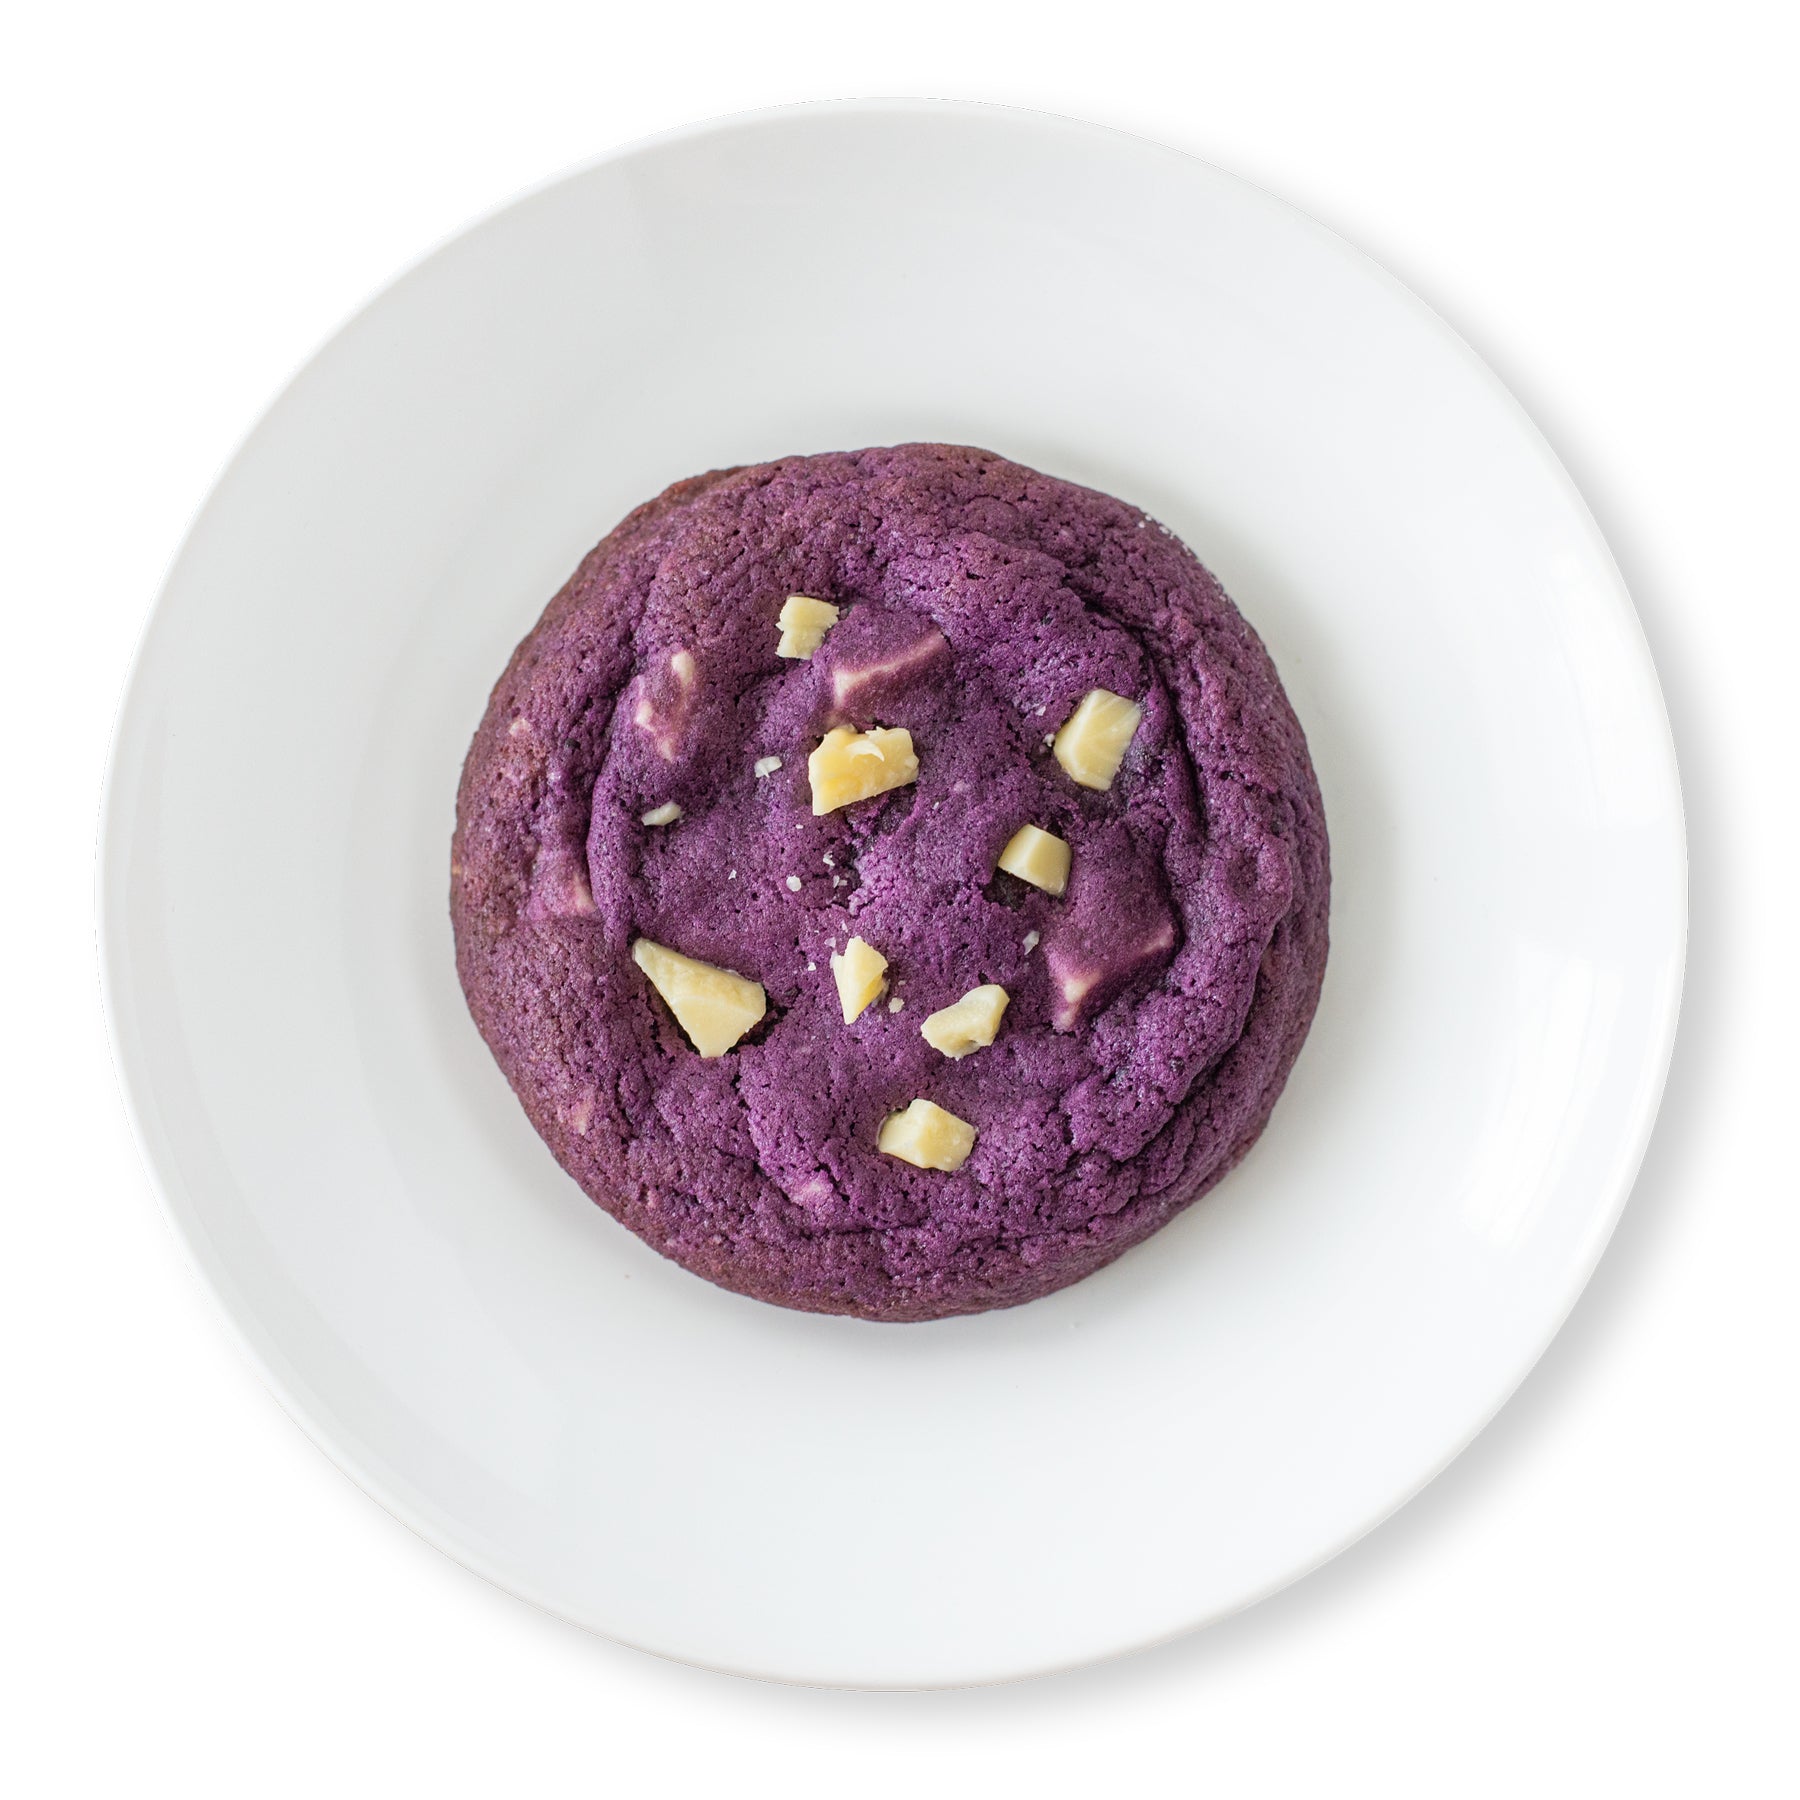 Top view of soft and chewy Ube Blackberry Cookies filled with white chocolate chunks and blackberry jam.